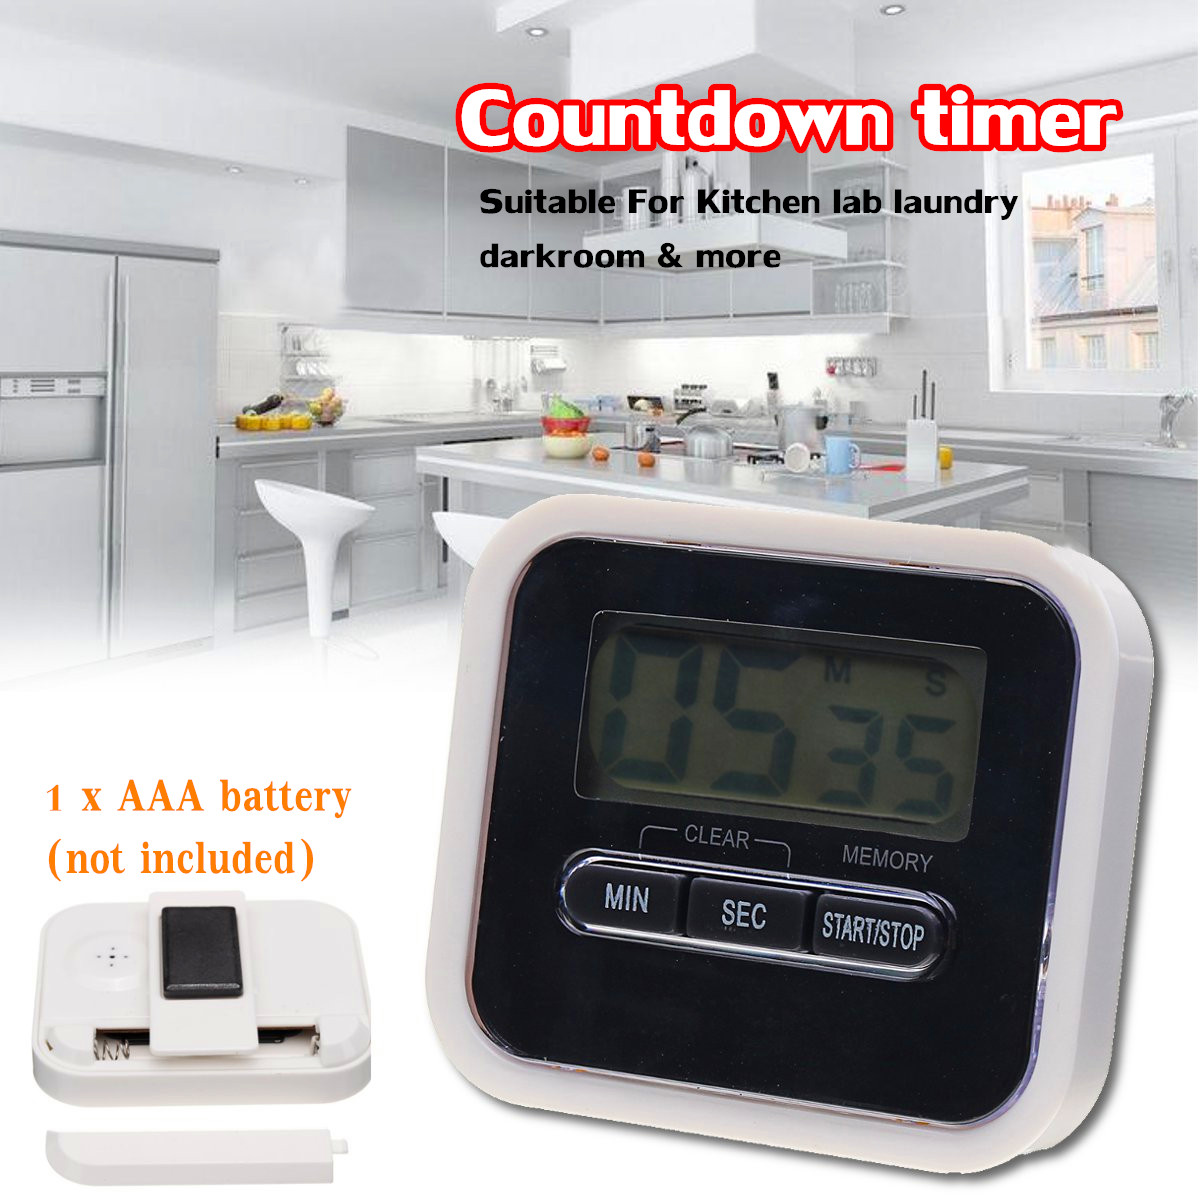 LCD Display Digital Home Cooking Timer Alarm Count UP Down Clock Alarm Countdown Timer ...1200 x 1200